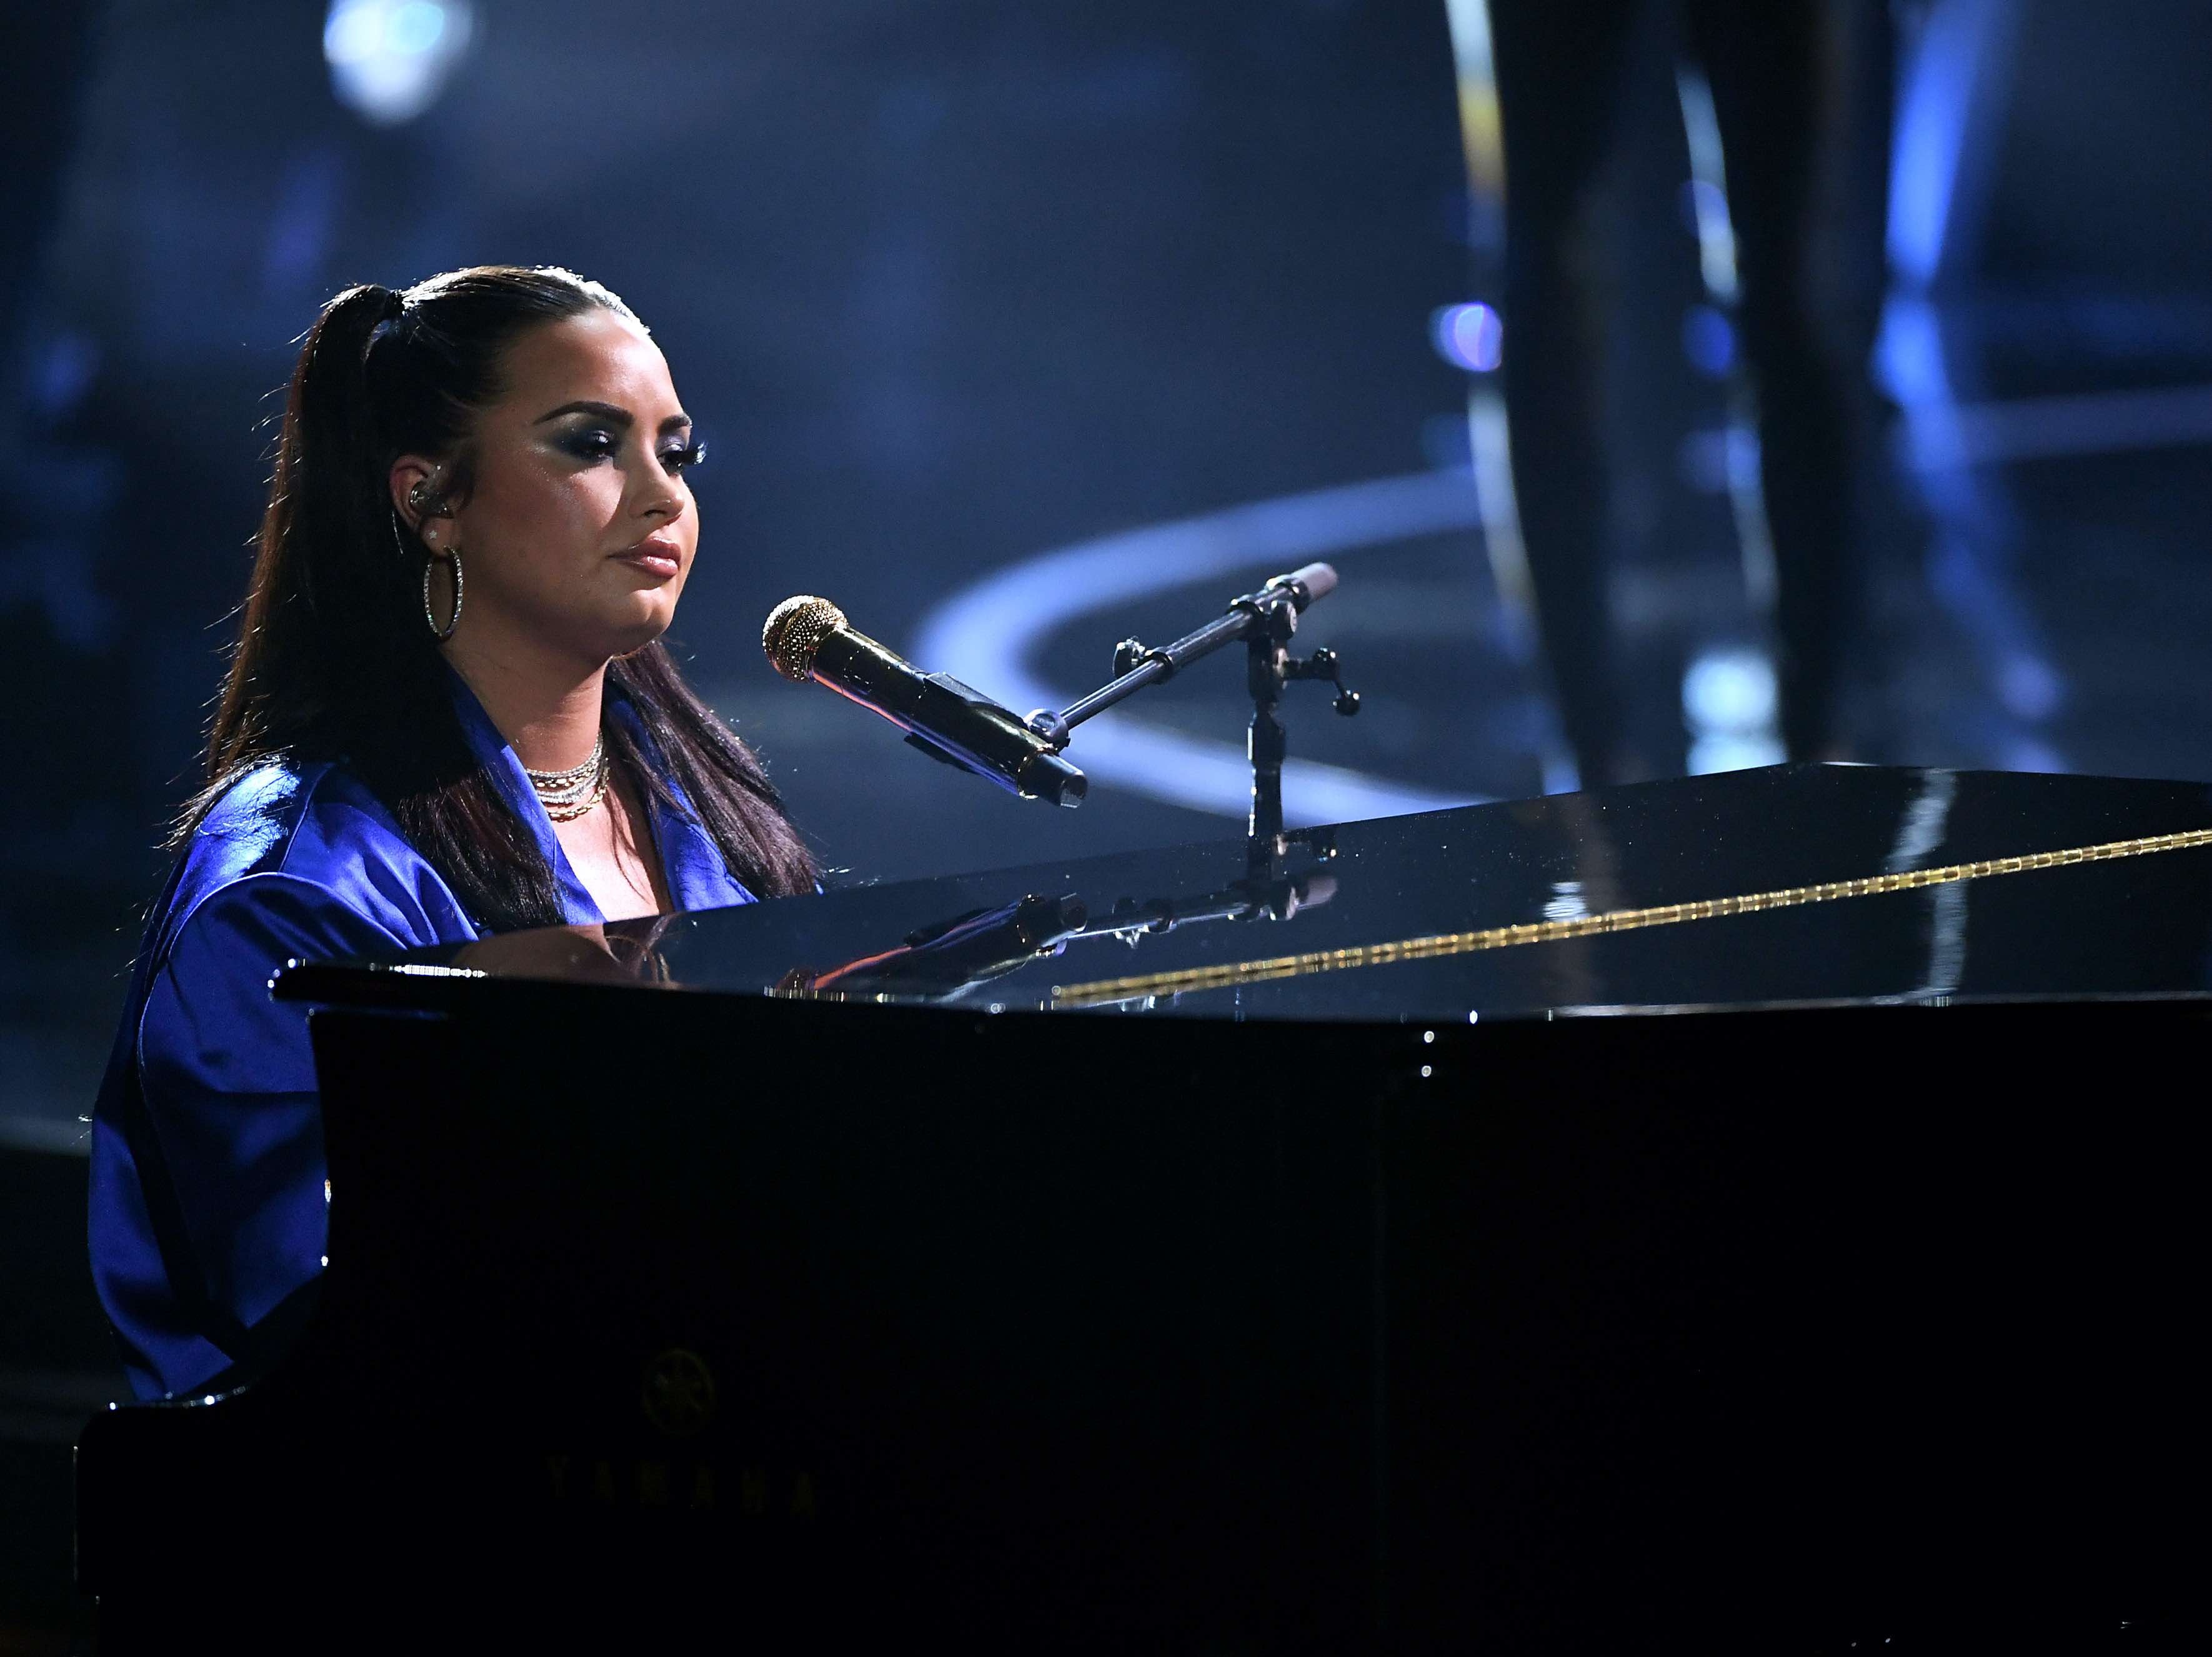 20201029-image-getty images- morning briefing-Demi Lovato